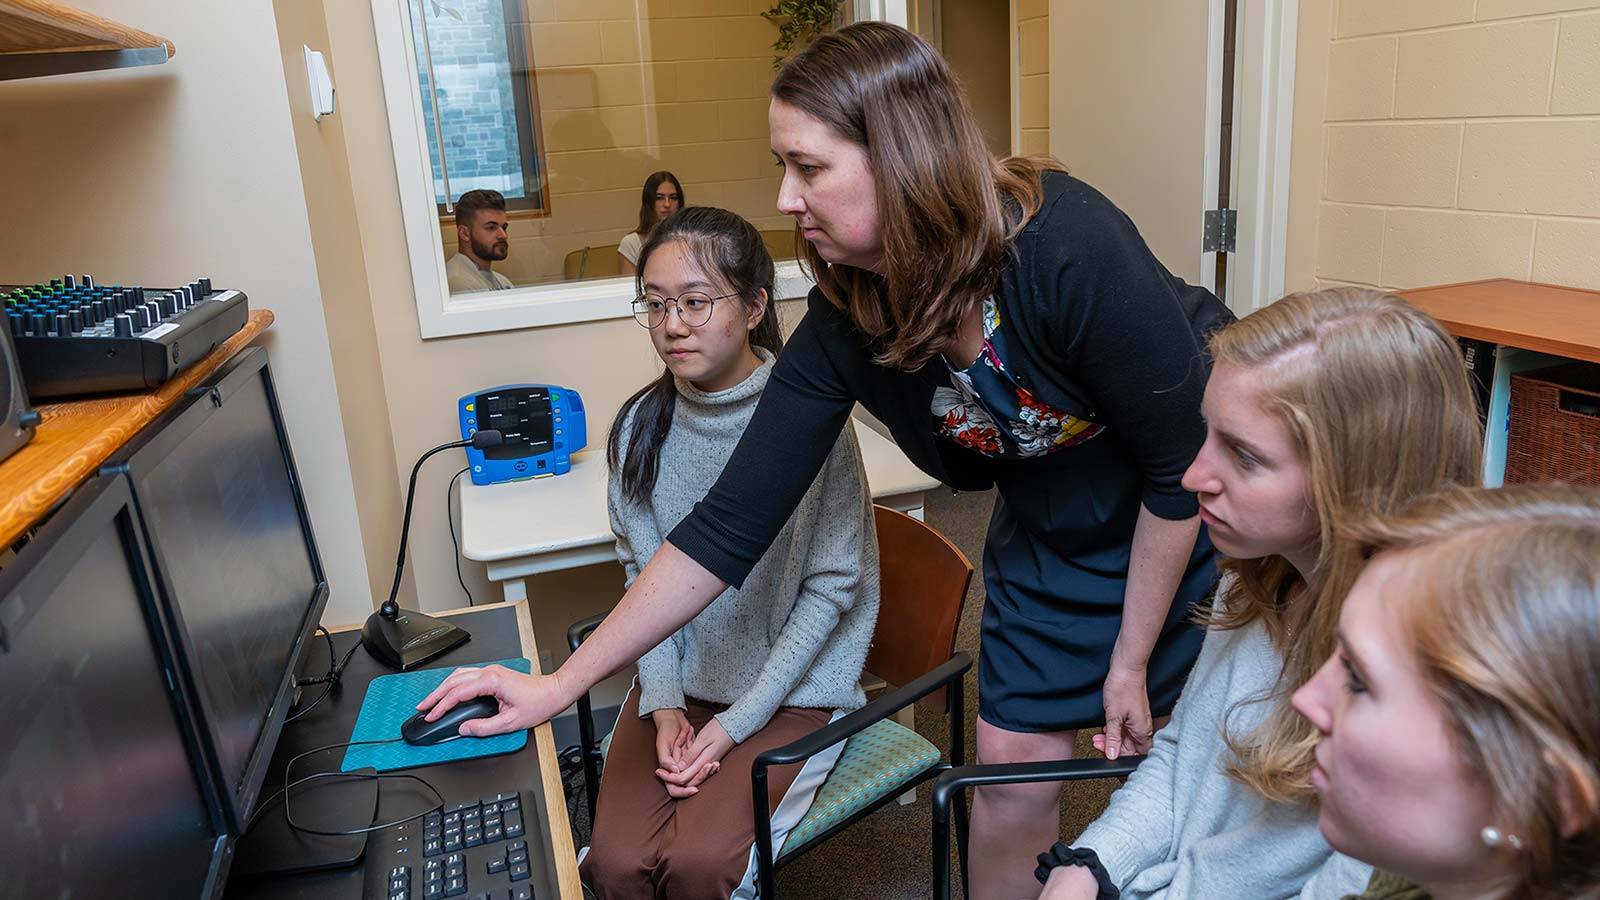 Jen Tomlinson and students work at a computer while research subjects are monitored in the background